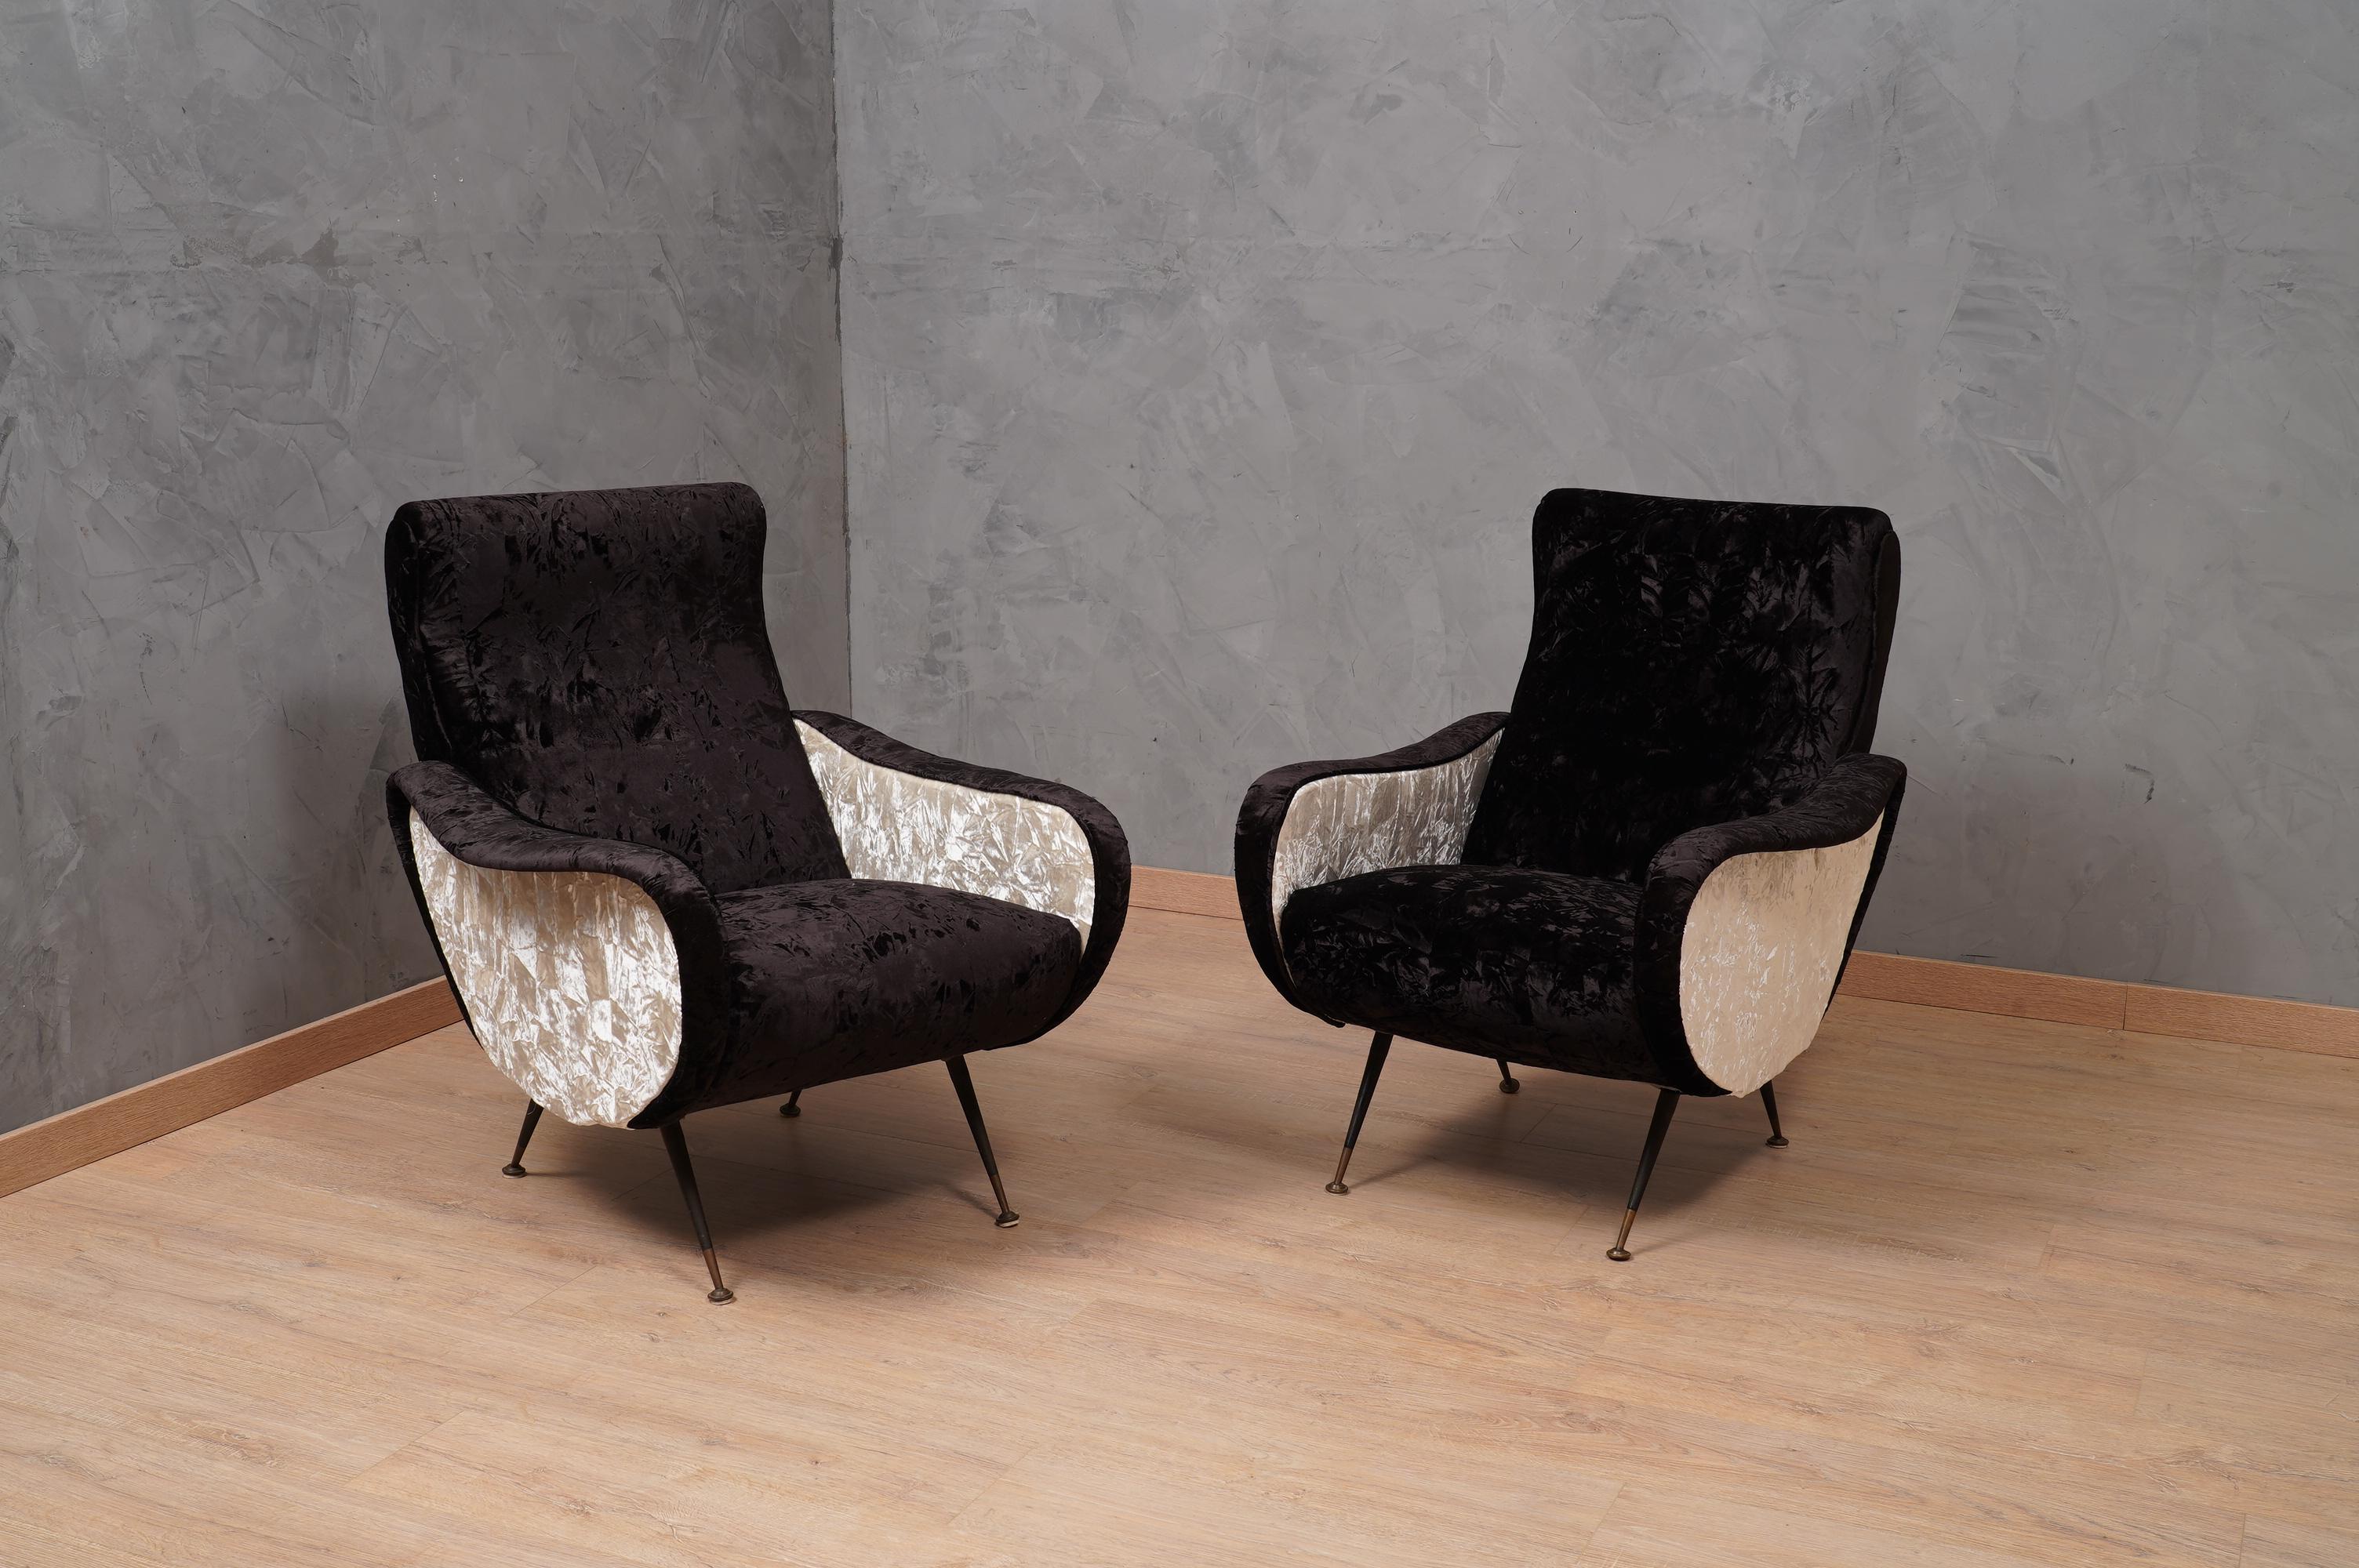 A revisitation of a Classic and famous pair of Italian armchairs full of charm, embellished with a marriage of a fine velvet.

The armchairs have been renovated with a combination of two velvet fabrics. Two crumpled velvets were used, one in black